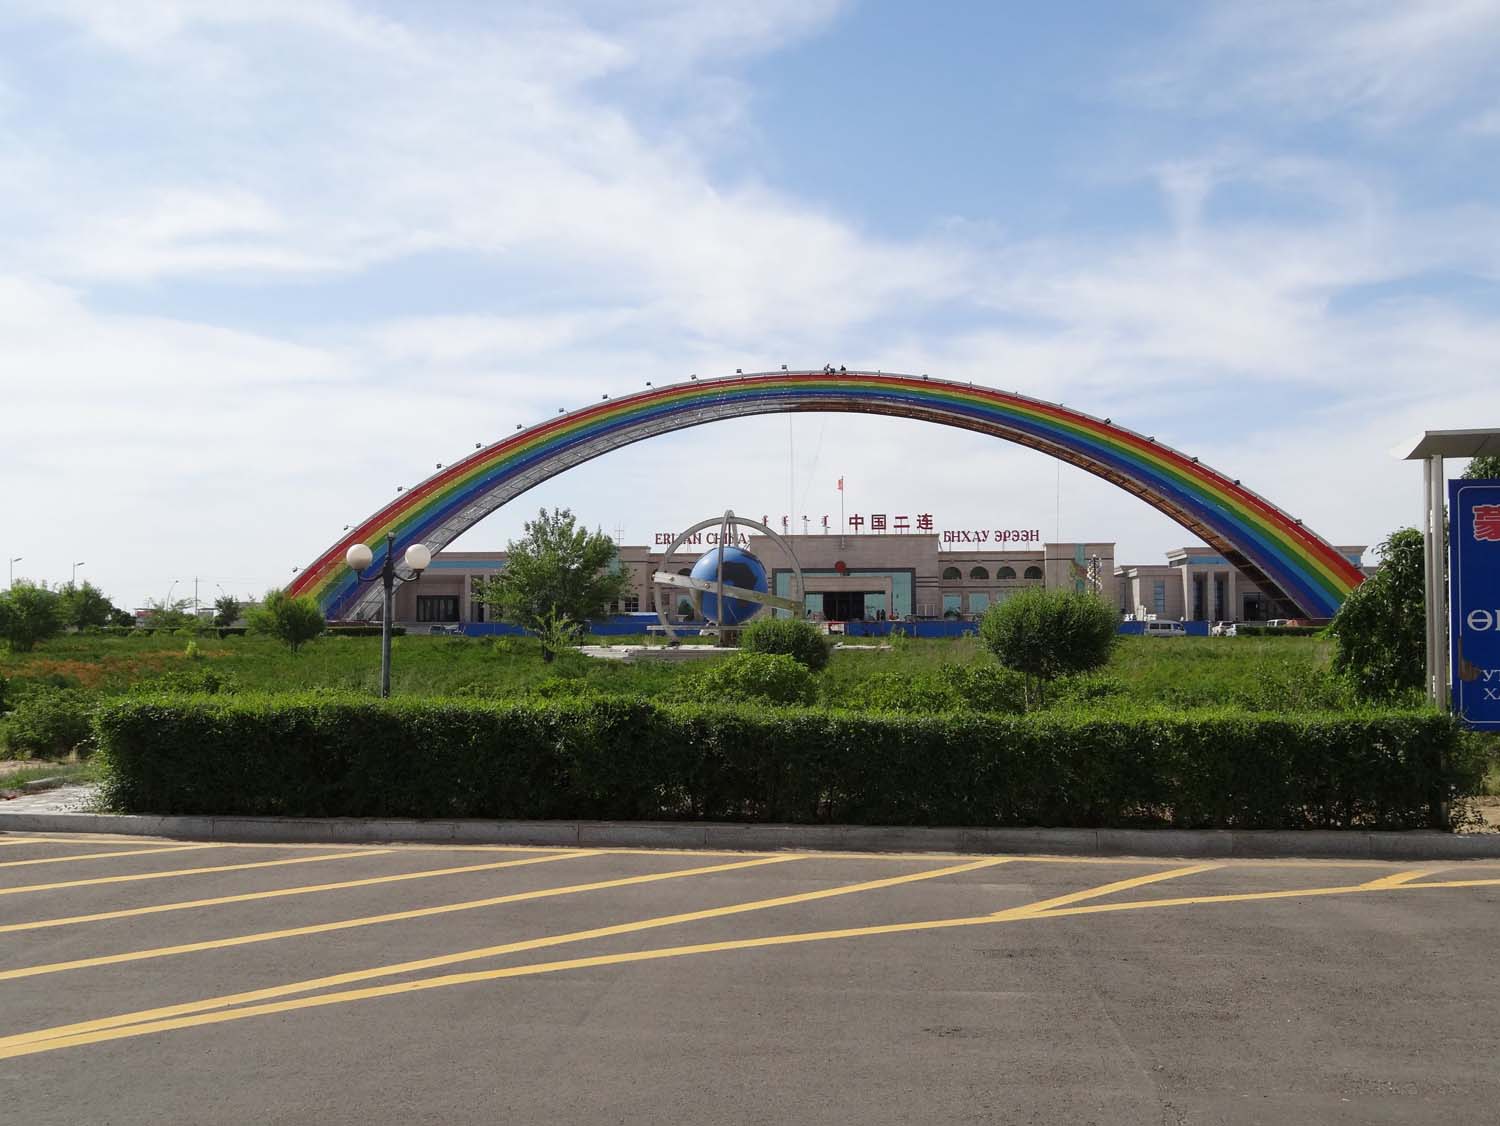 the happy gay rainbow at the entry to the Chinese immigration building